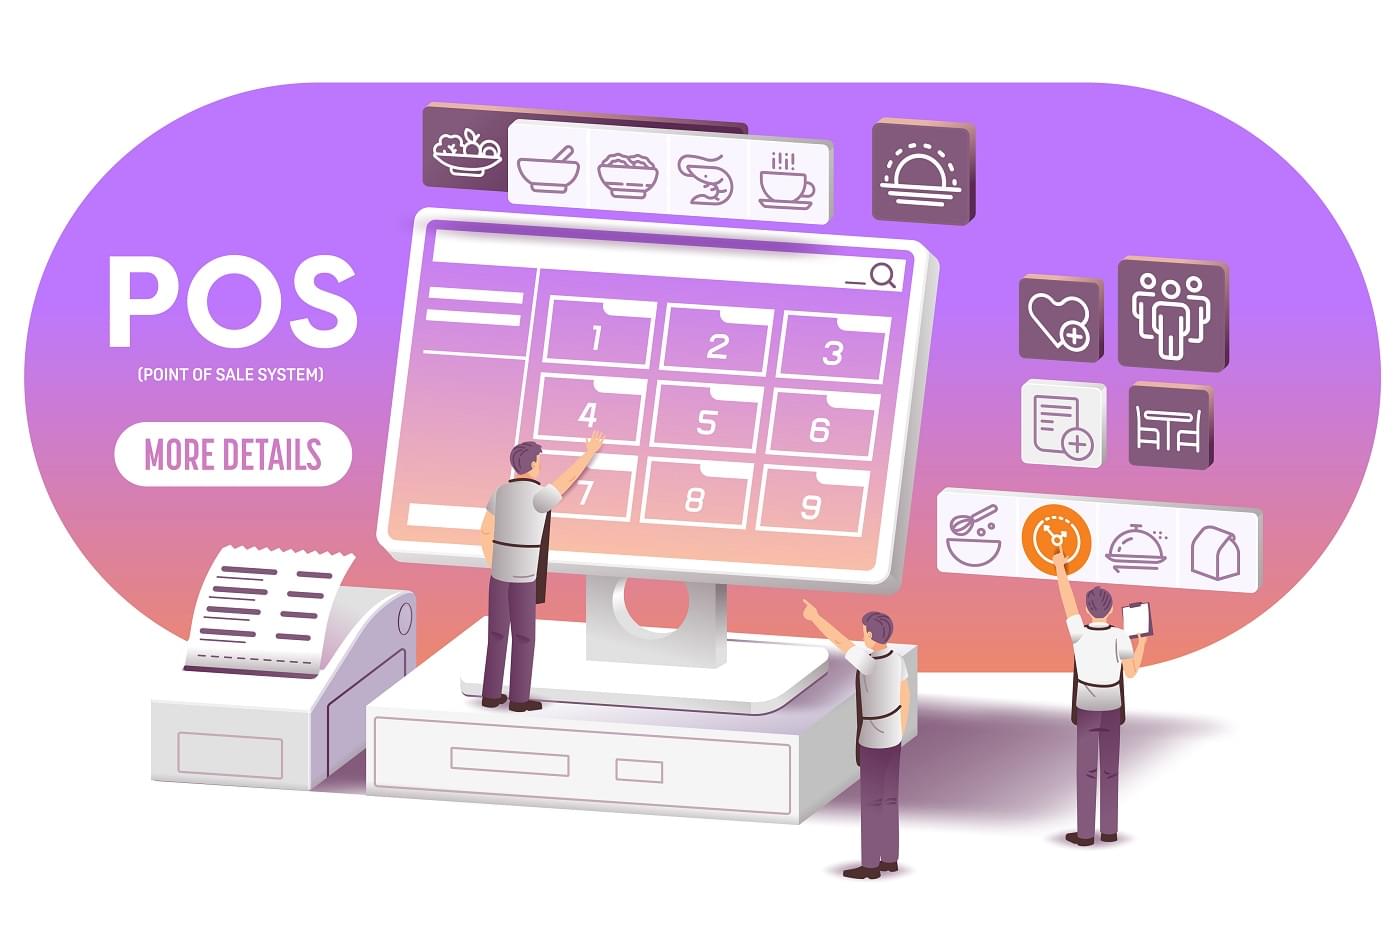 What Are the Different Types of POS Systems?